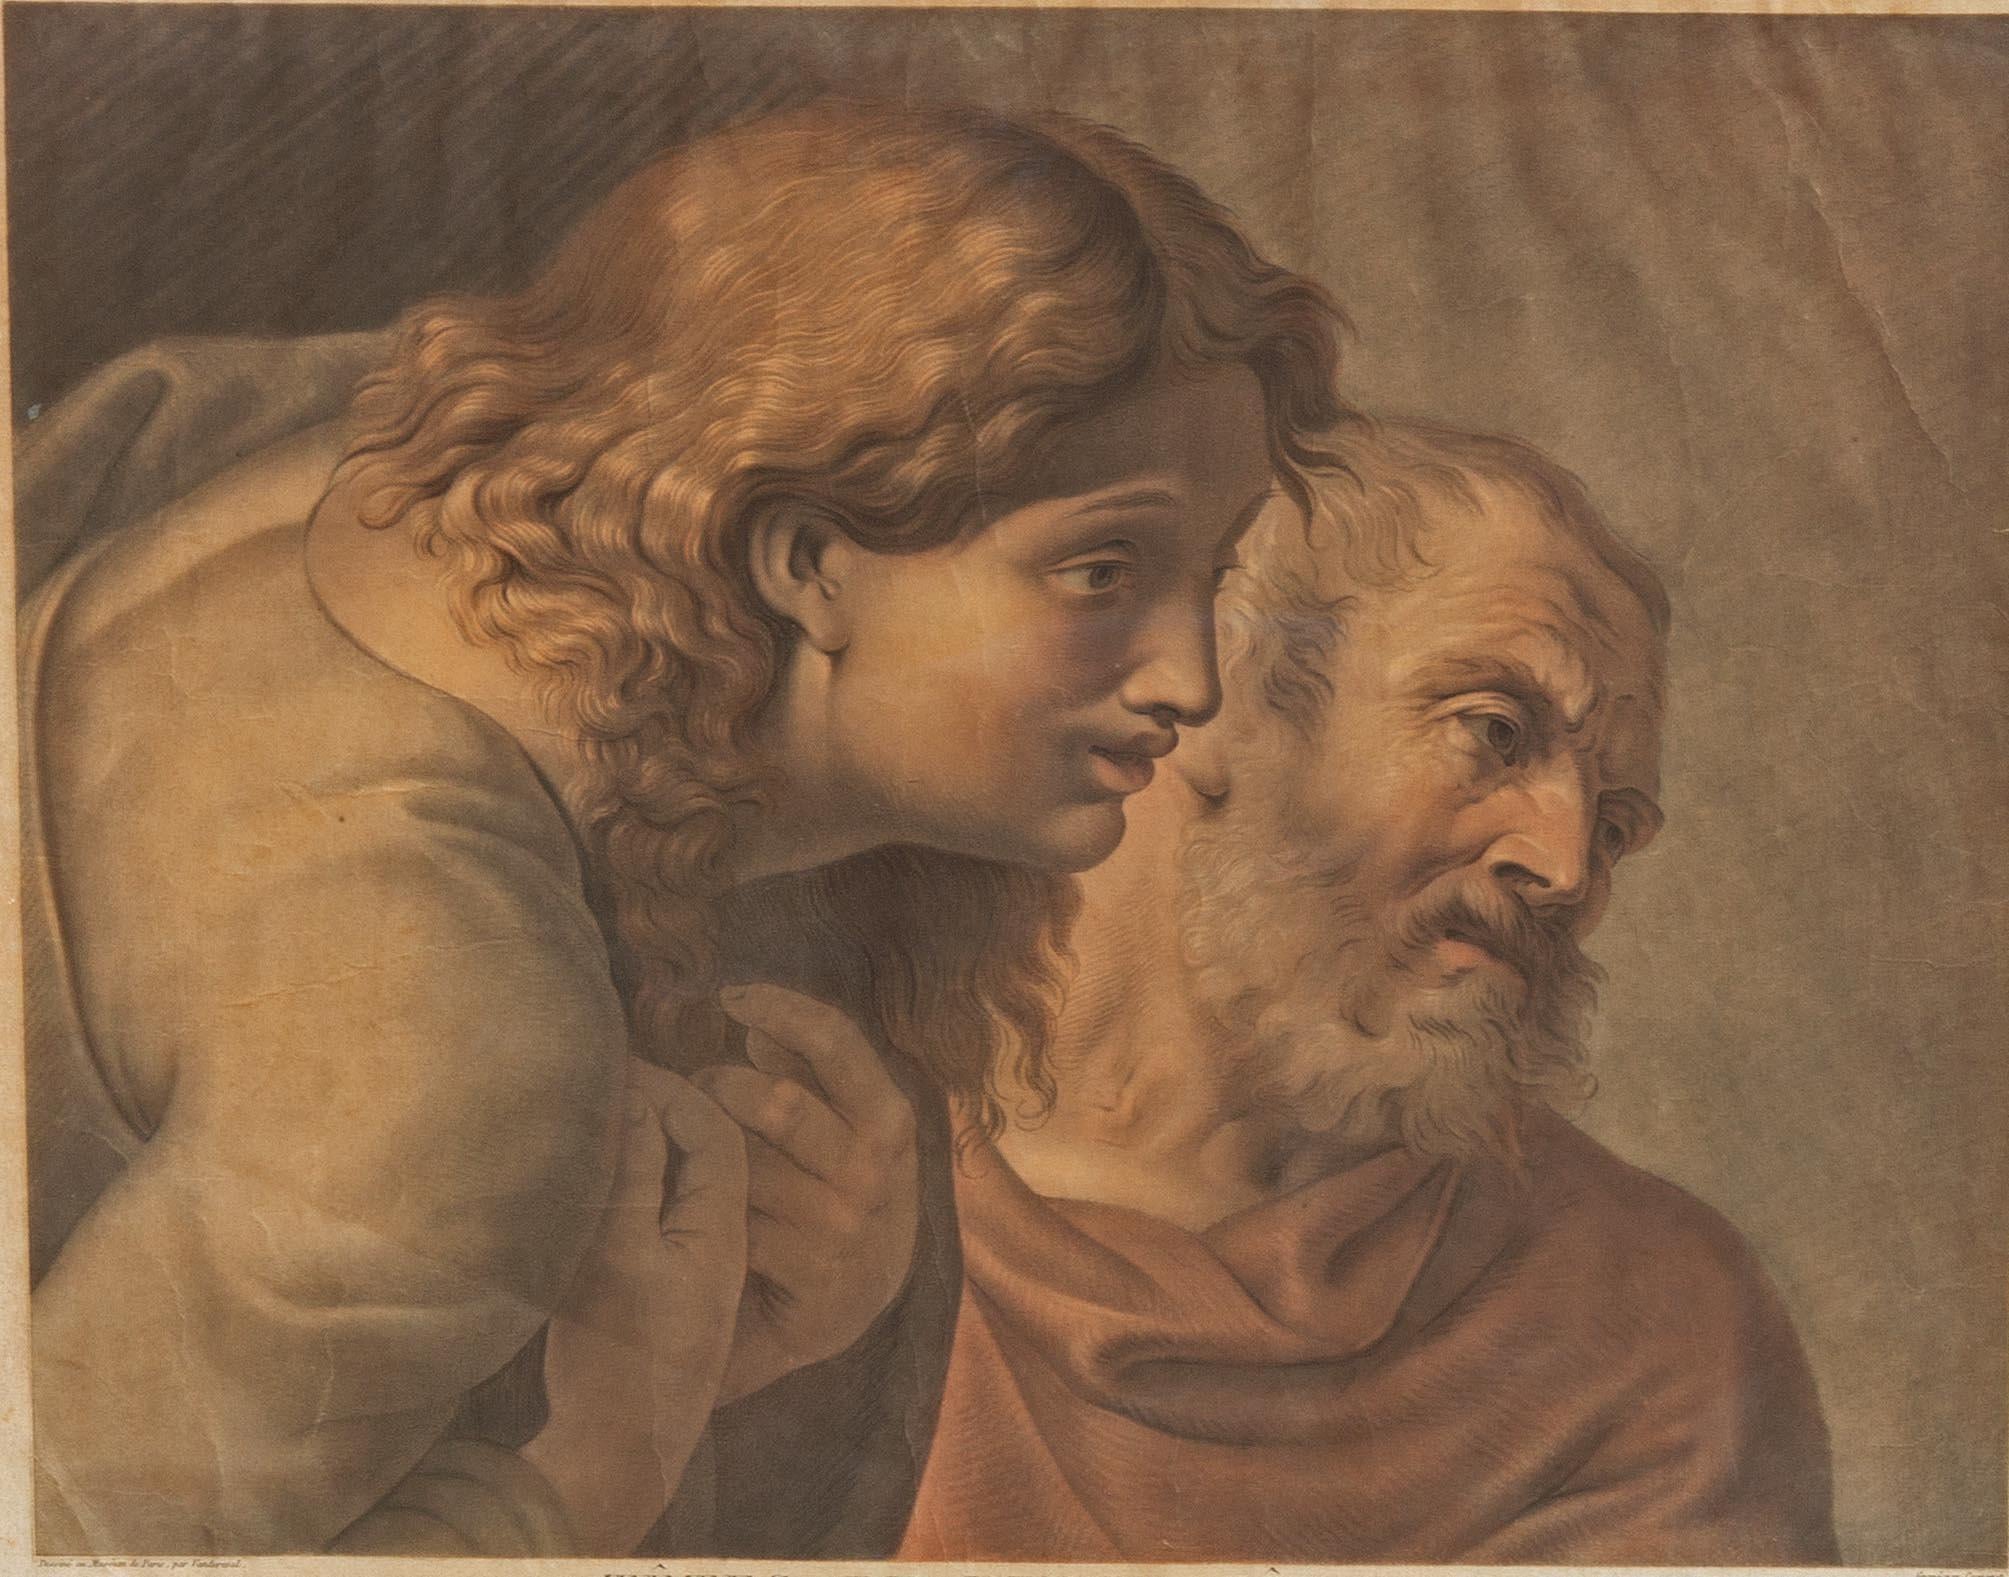 Early 19th century print on laid paper. Two apostles after Raphael (Raffaello Sanzio da Urbino). Good color. Some subtle wrinkles to the paper. Framed. 